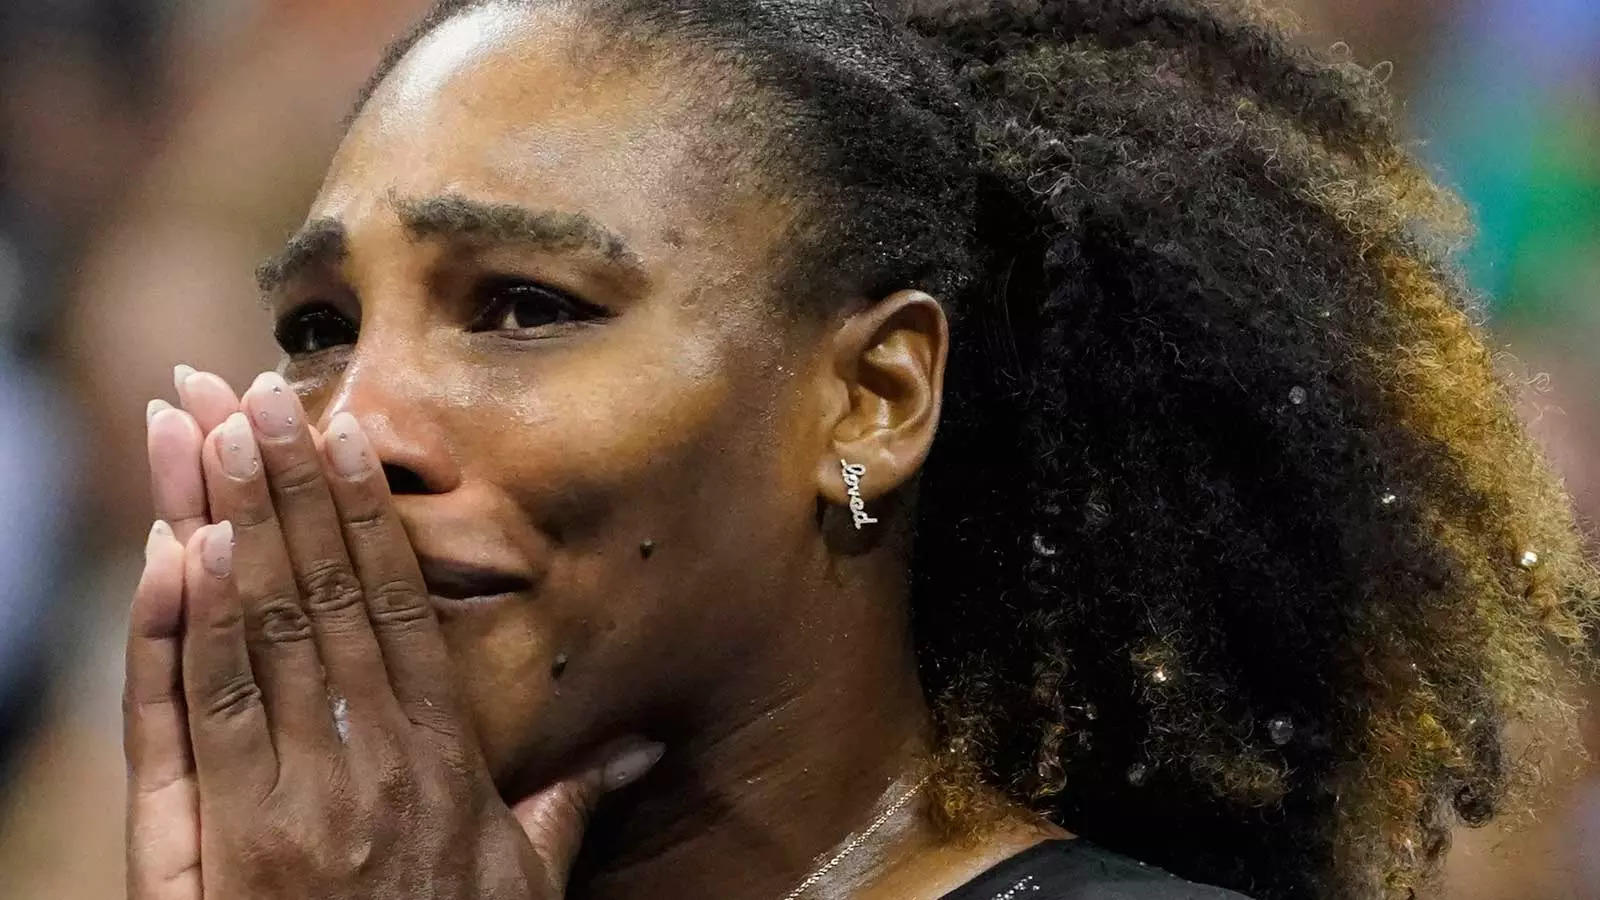 Watch a teary-eyed Serena Williams say goodbye to tennis, but she's keeping the door open on her comeback